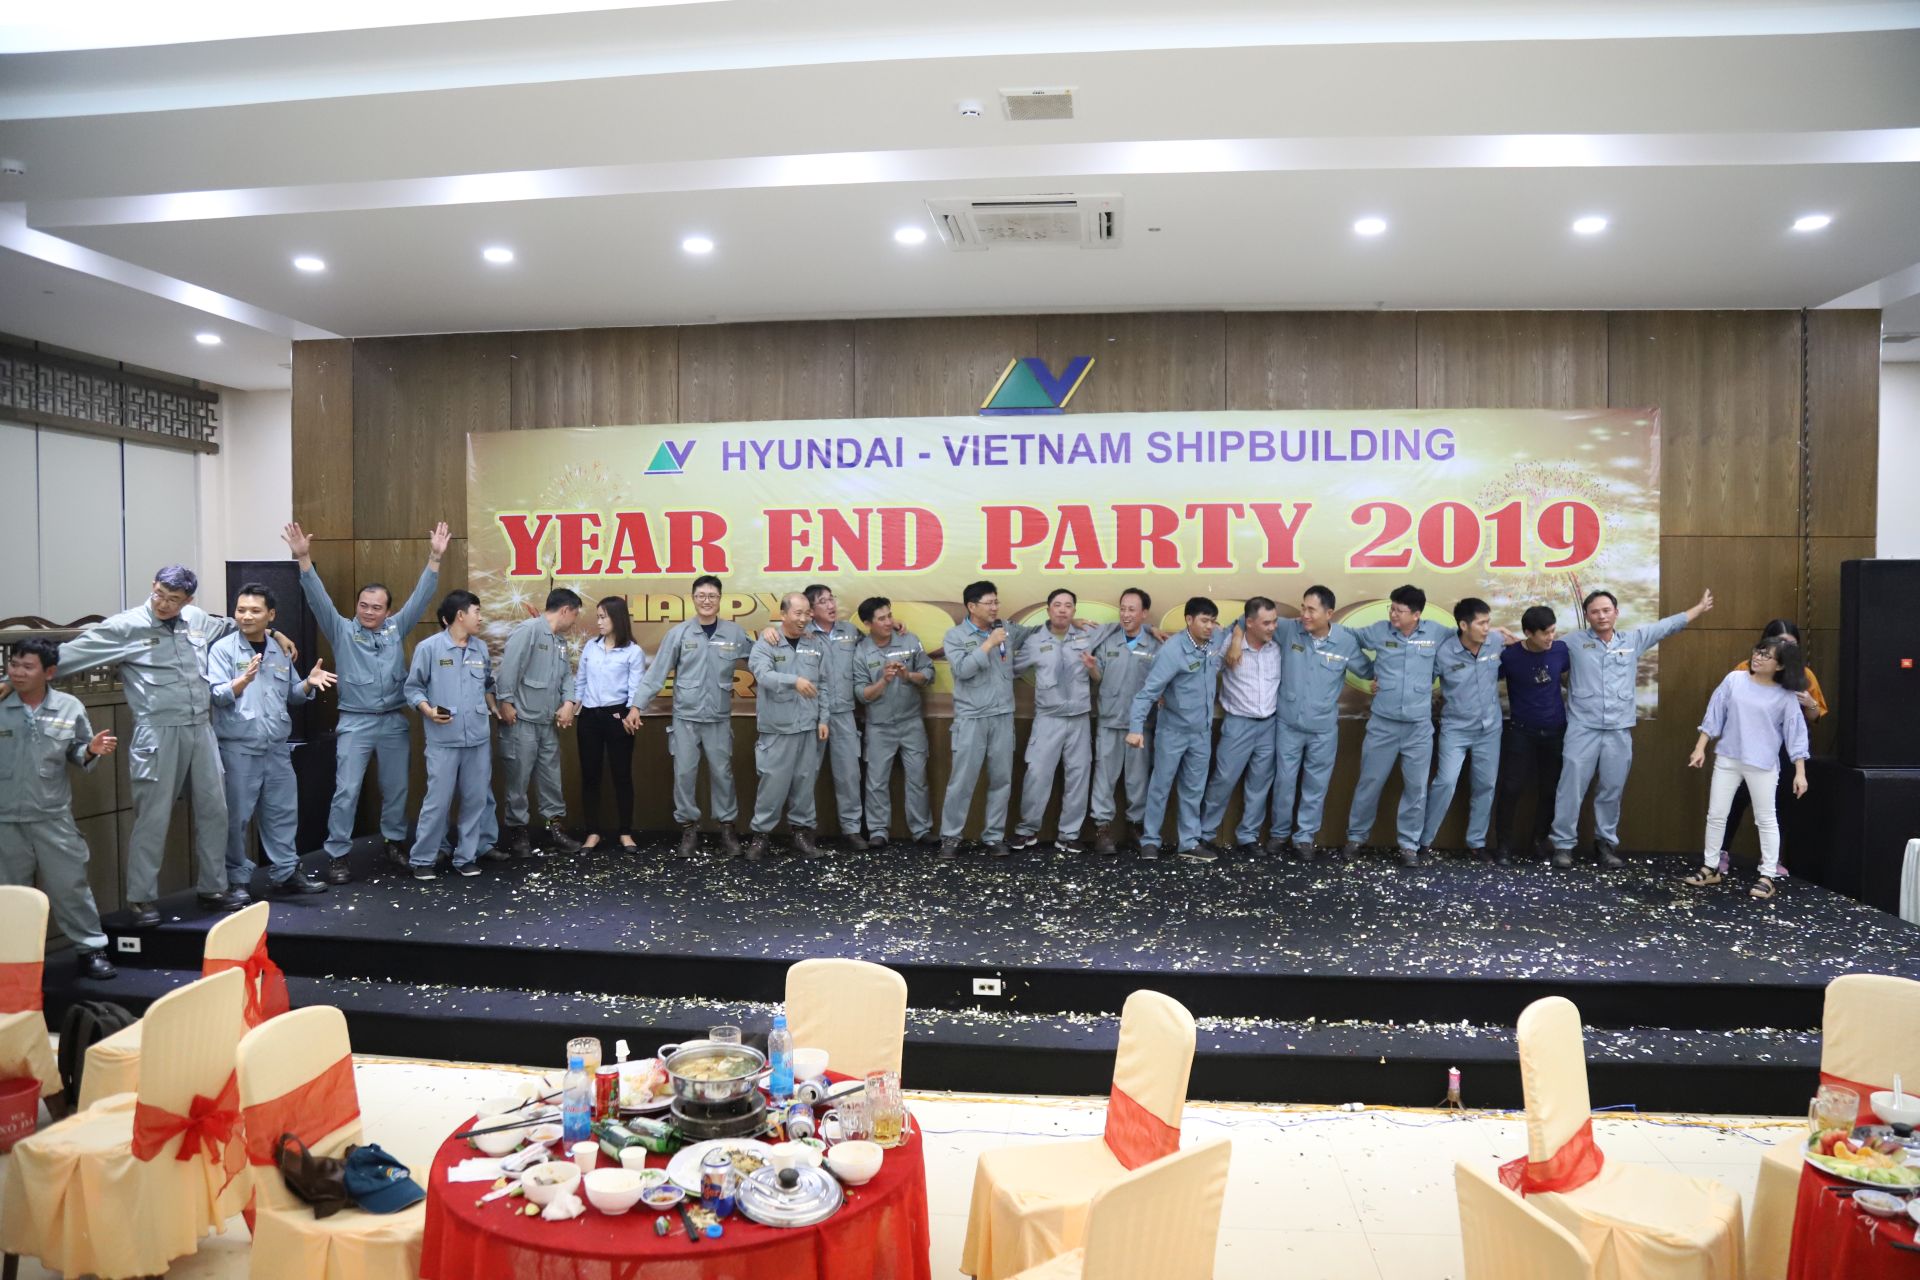 2020.01.16 Yead End Party of HVS MGRs